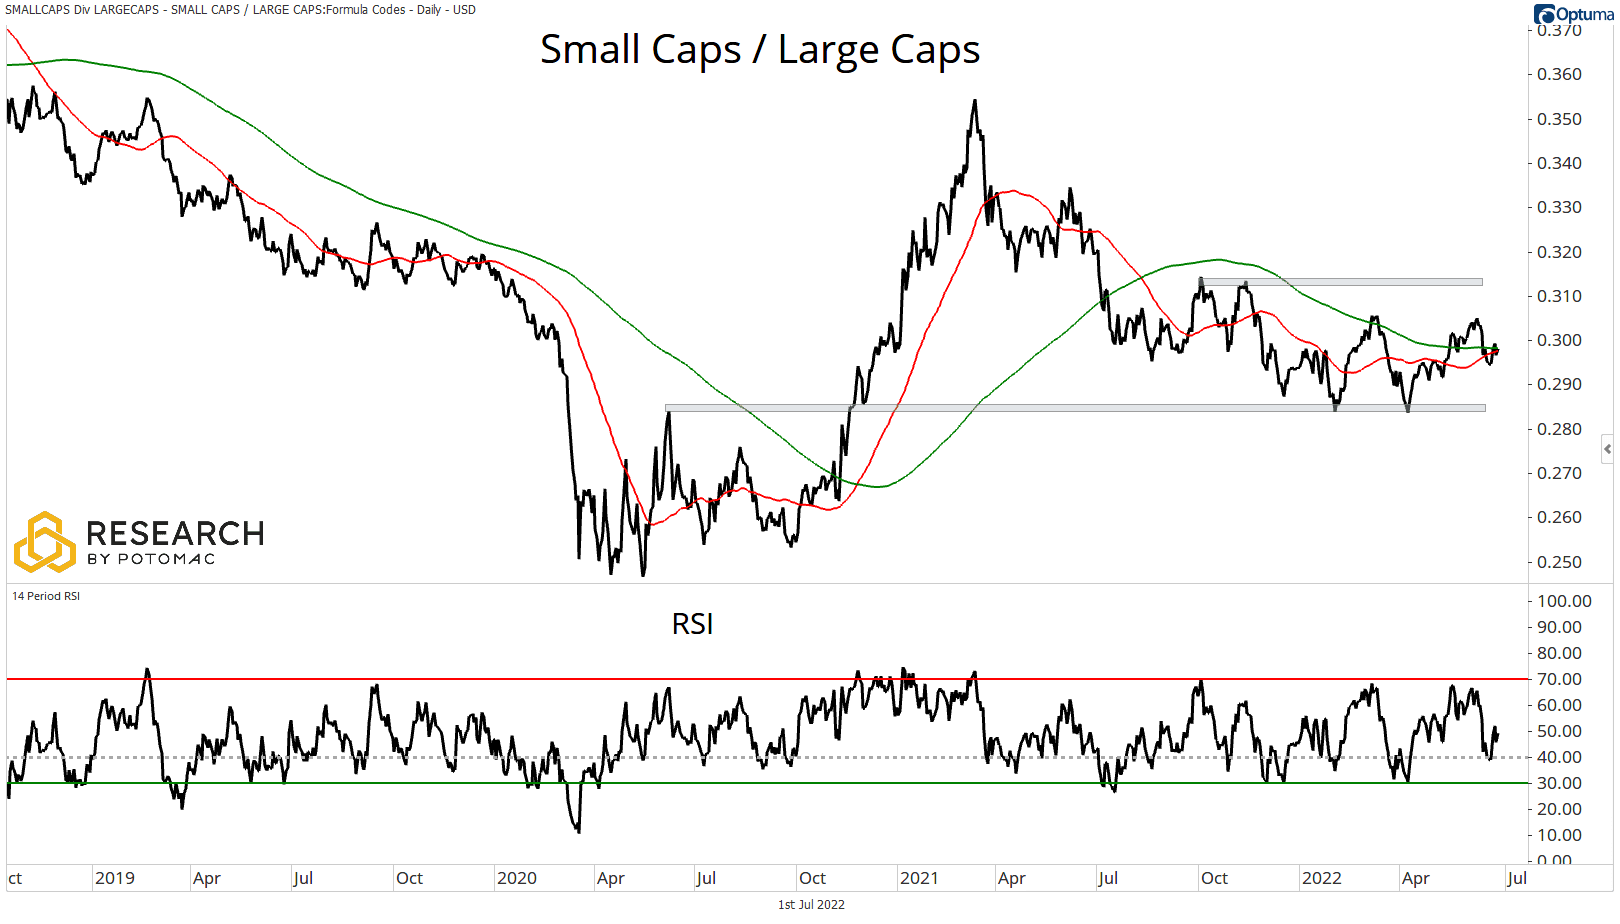 Small Caps / Large Caps chart for March 25th research.